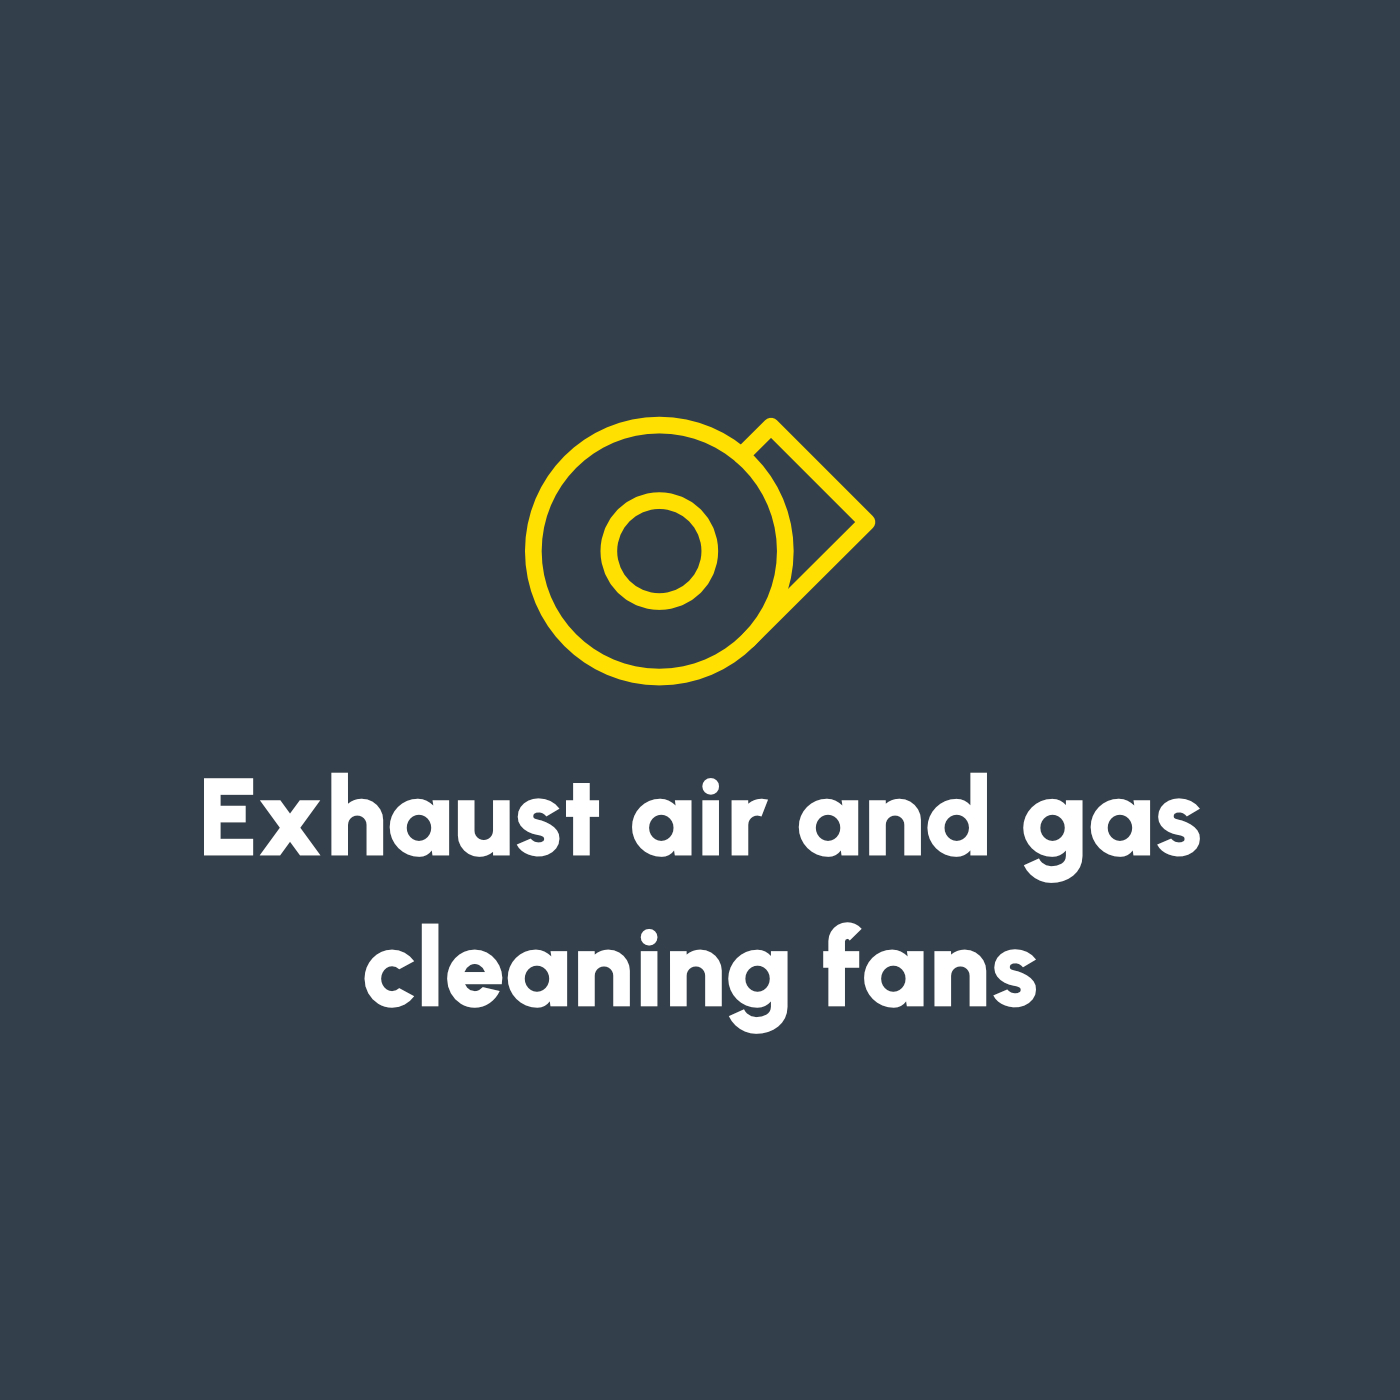 Exhaust air and gas cleaning fans